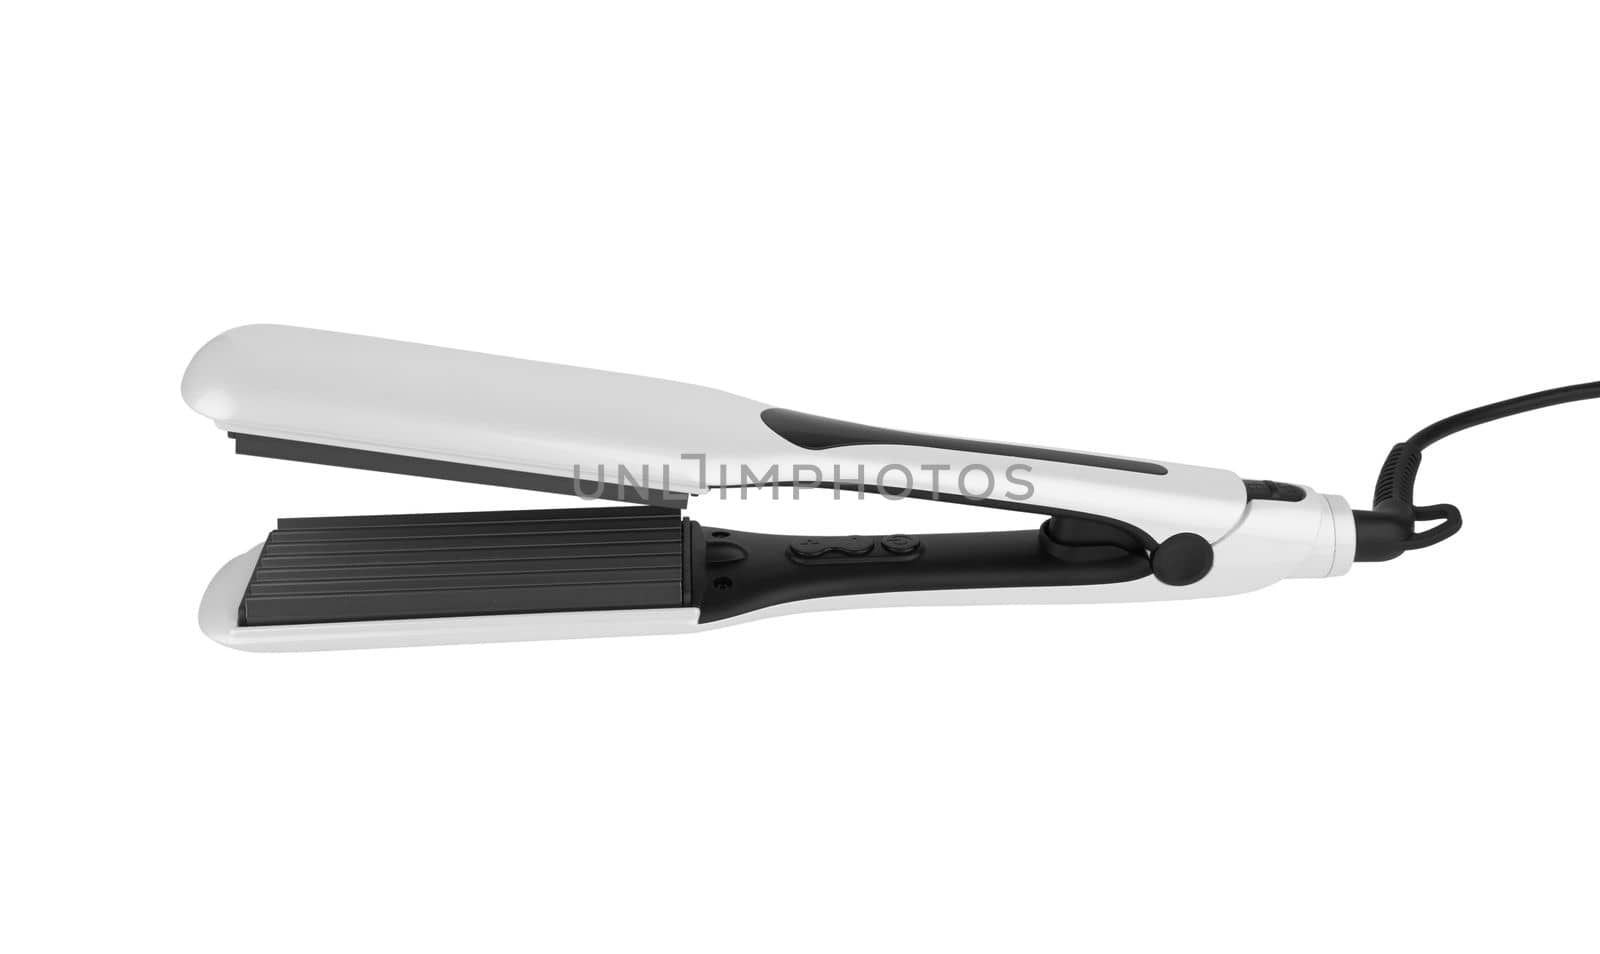 Electric curling iron by pioneer111